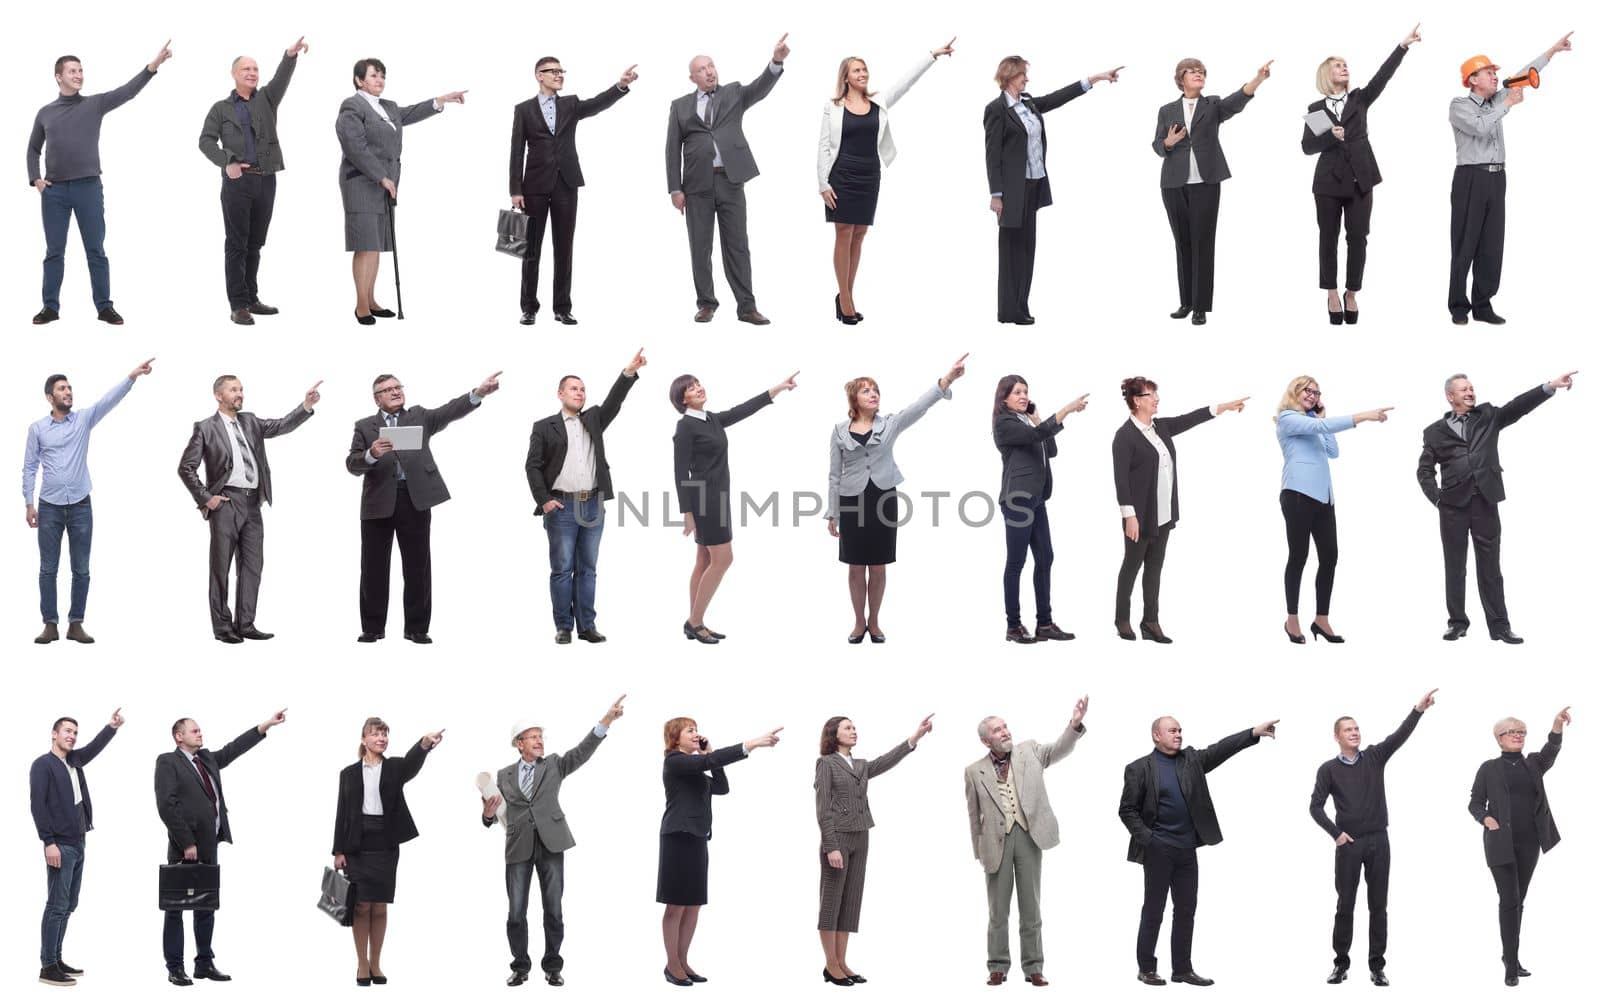 group of business people showing thumbs up isolated on white background